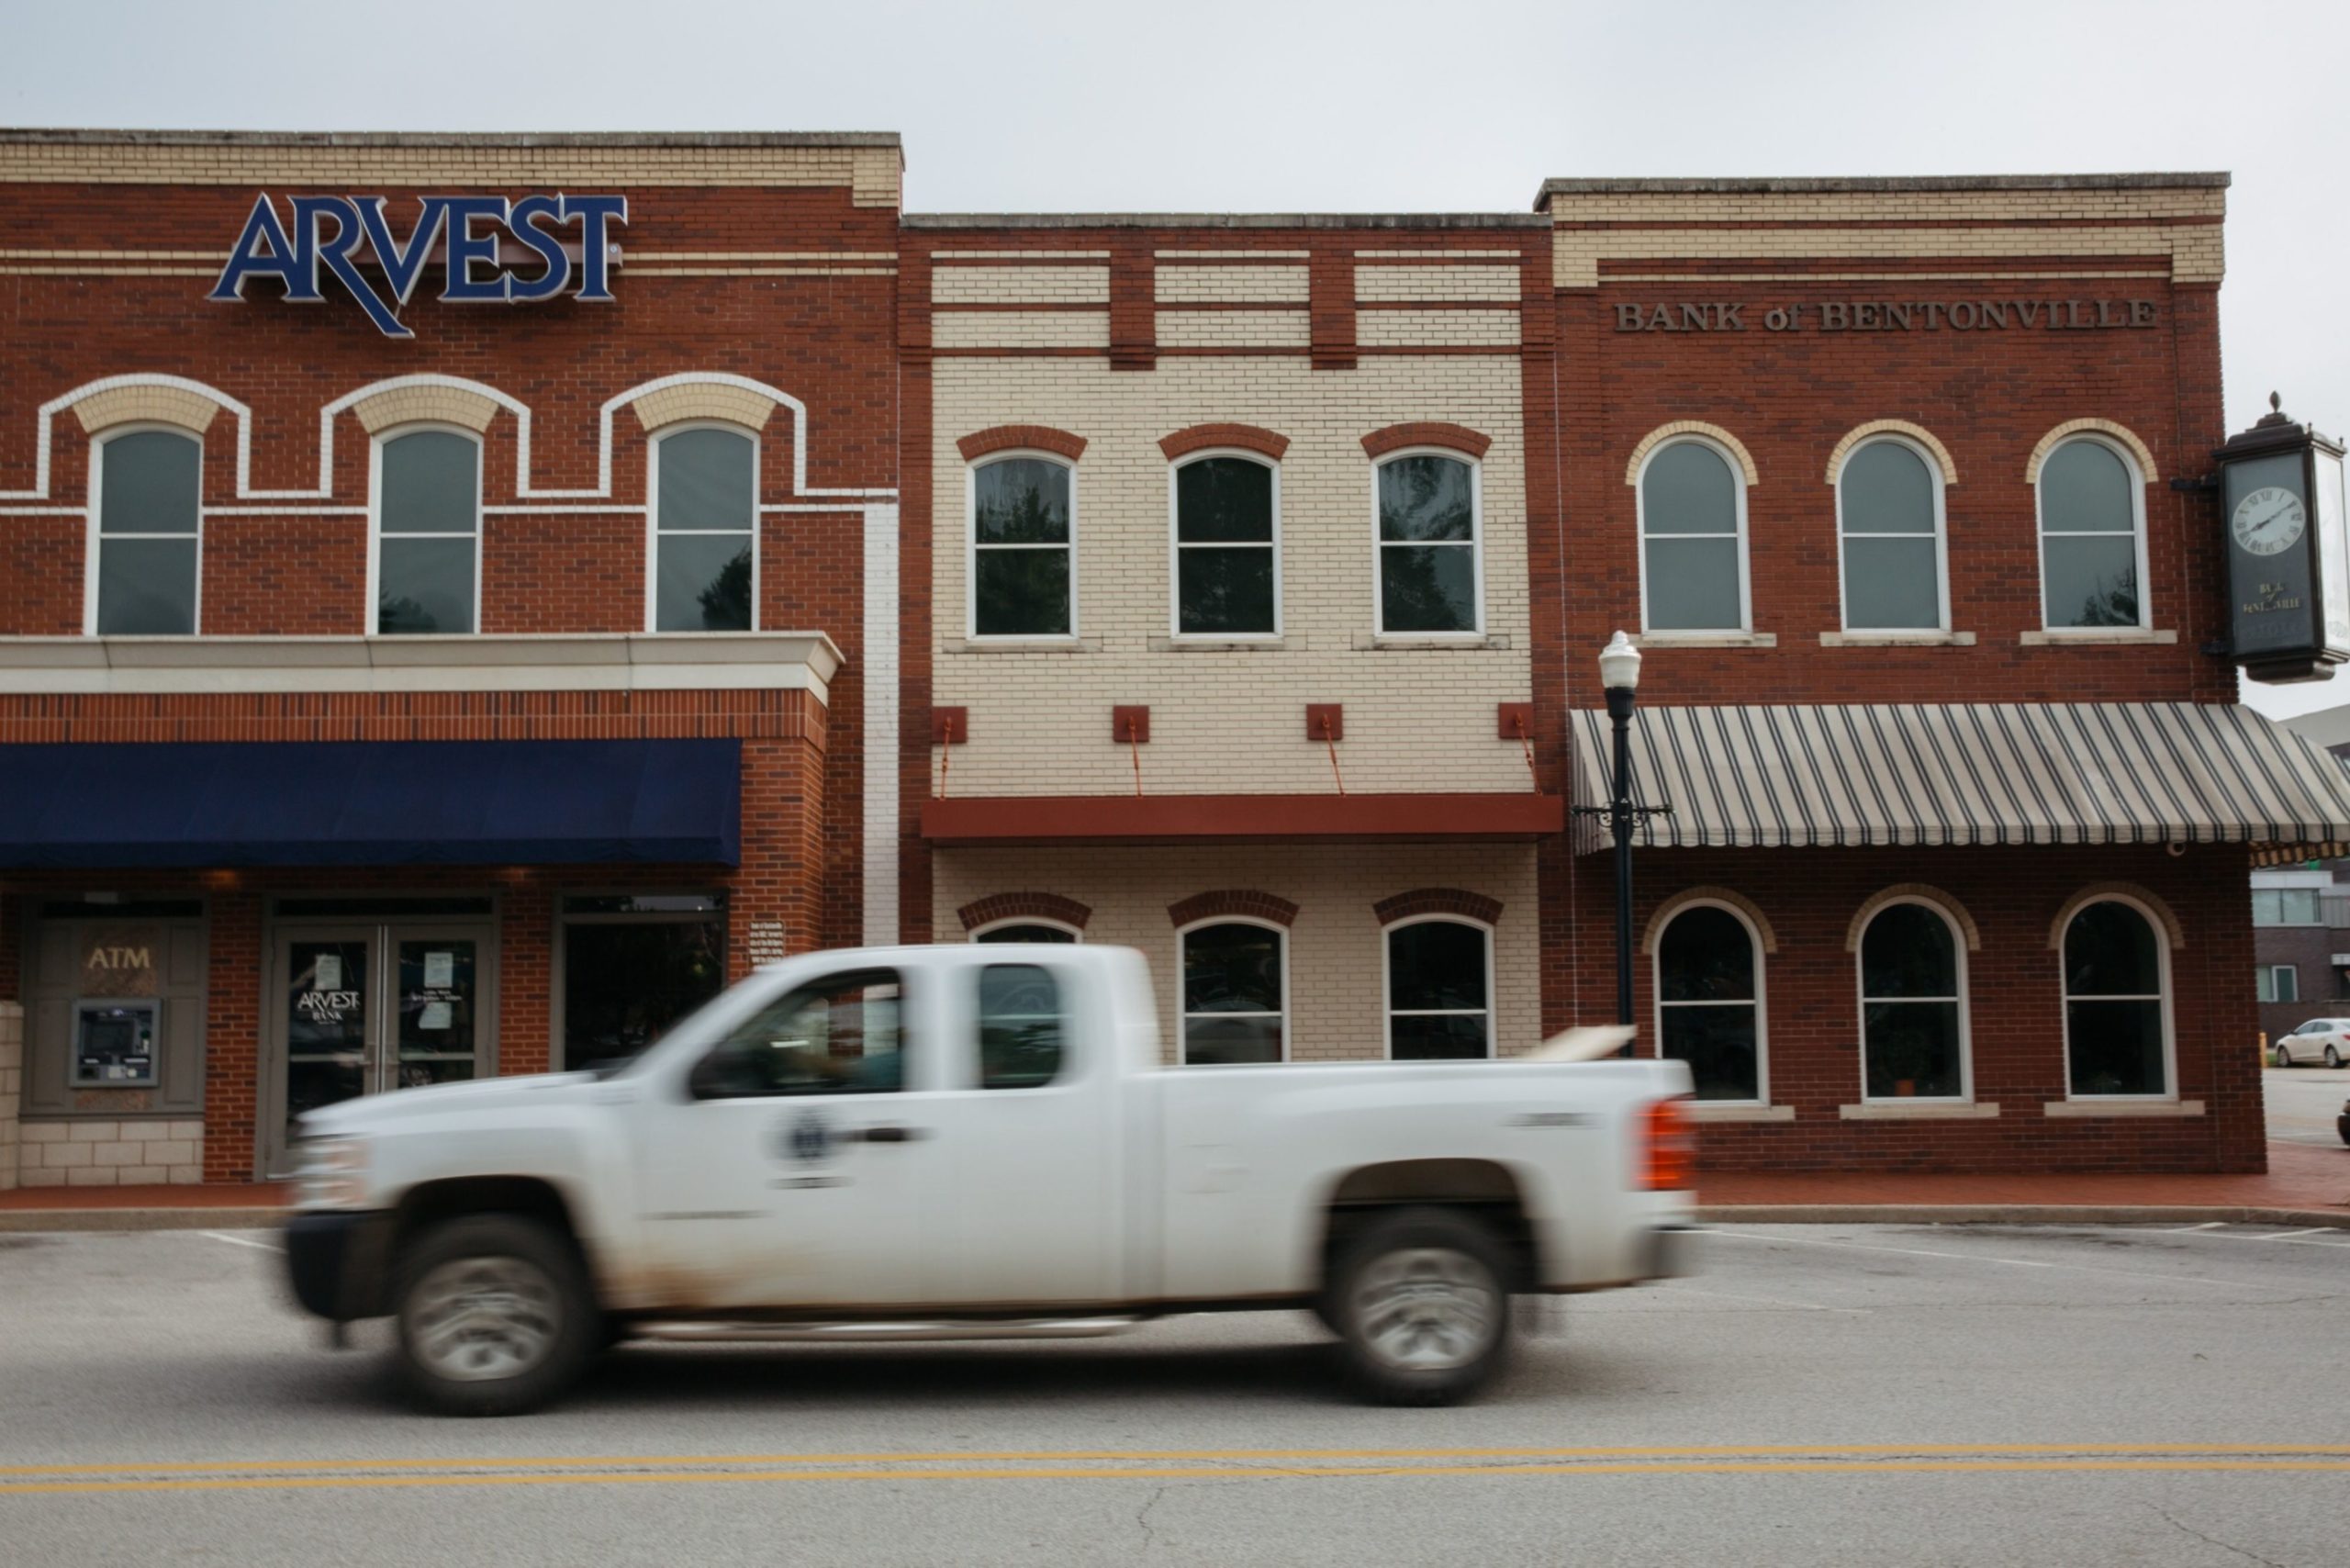 A pickup truck drives past an Arvest Bank branch on the square in Bentonville, Arkansas, U.S., on Thursday, May 28, 2020. The annual Walmart Inc. shareholder celebration attracts a varied crowd who pour money into the hotels, bars and restaurants in and around the retailer's hometown of Bentonville, Arkansas. The Covid-19 pandemic forced Walmart to pivot to a virtual gathering on June 3.